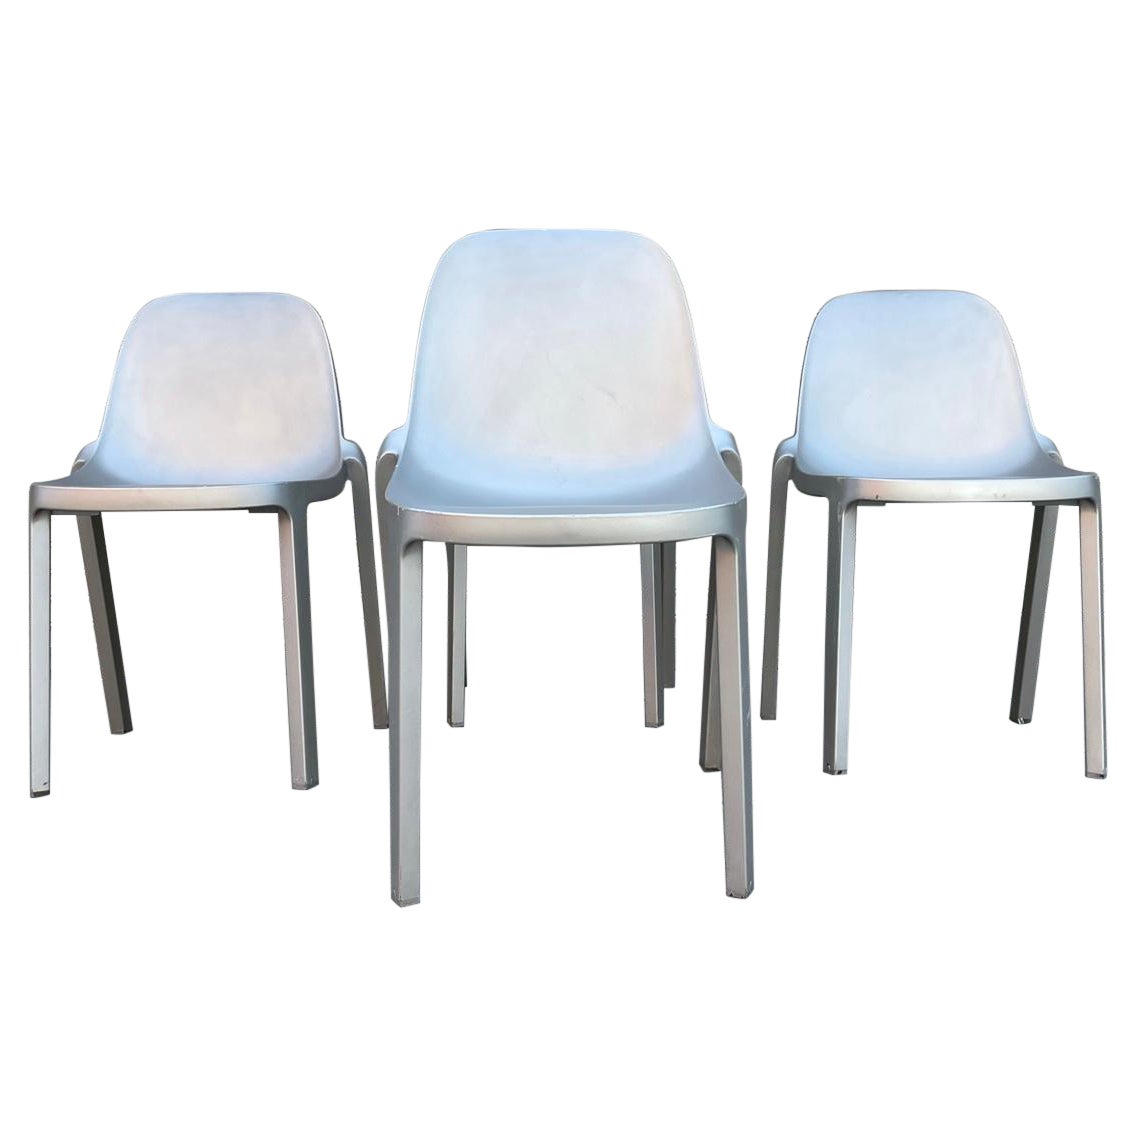 Set of 4 Broom Chairs by Philippe Starck for Emeco